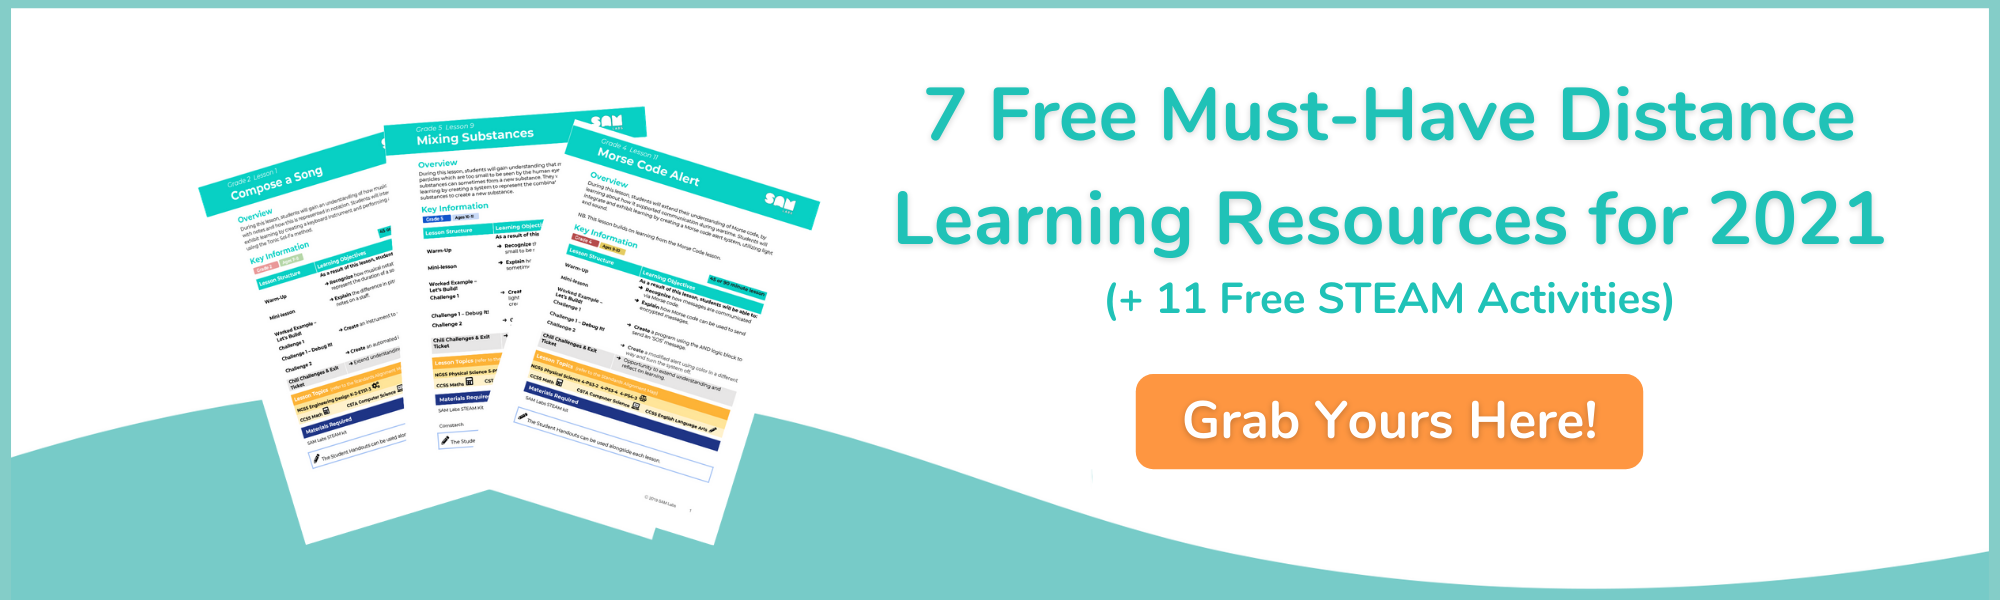 Copy of 7 Free Must-Have Distance Learning Resources for 2021-1